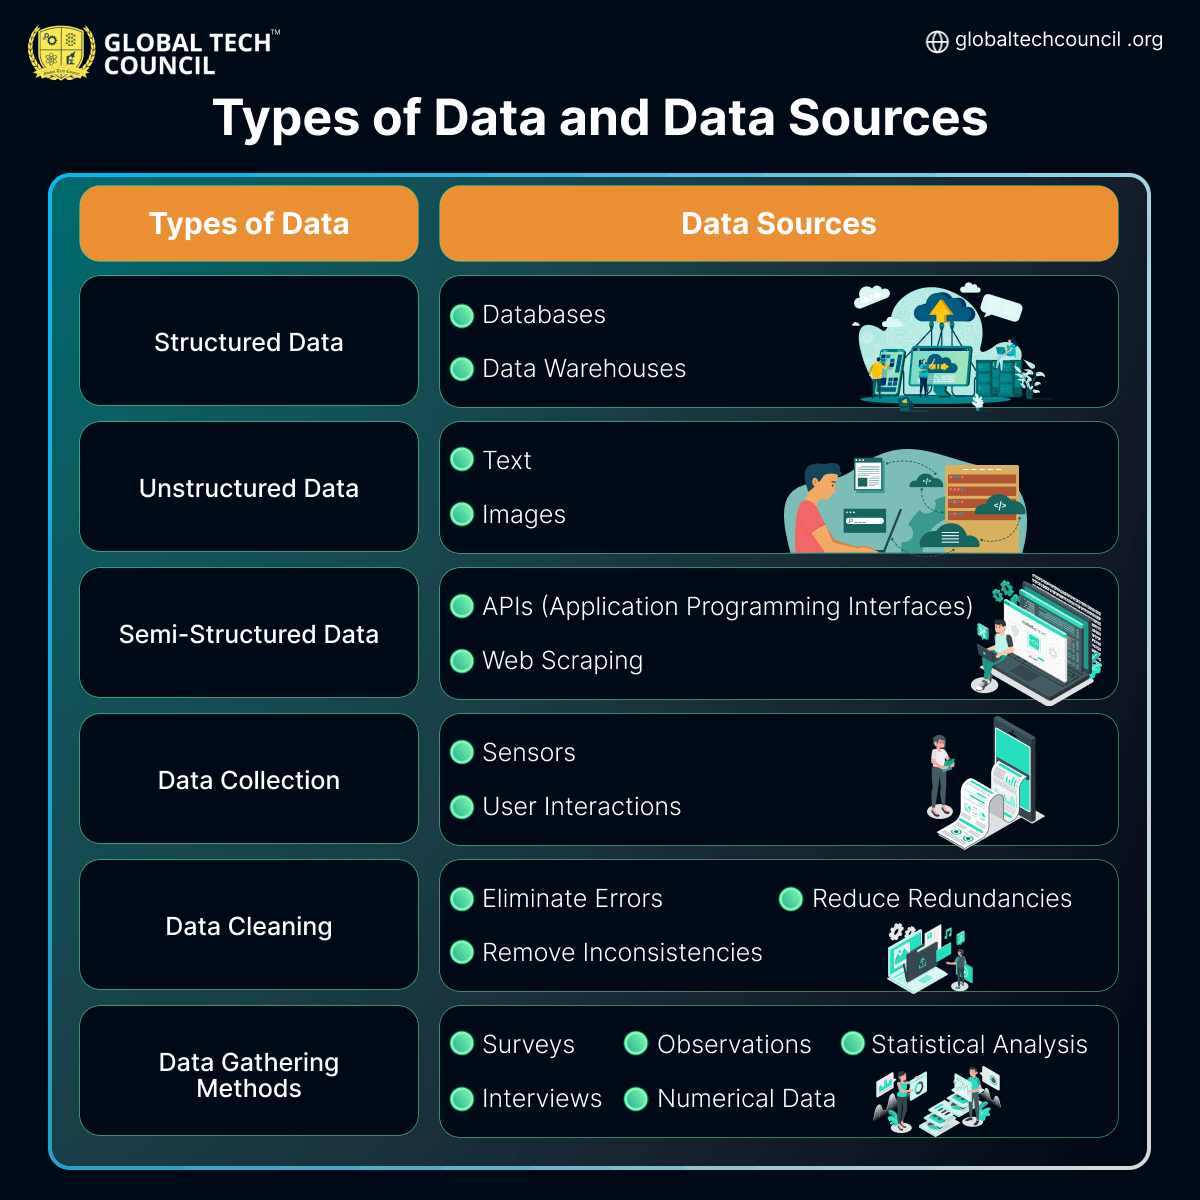 Types of Data and Data Sources